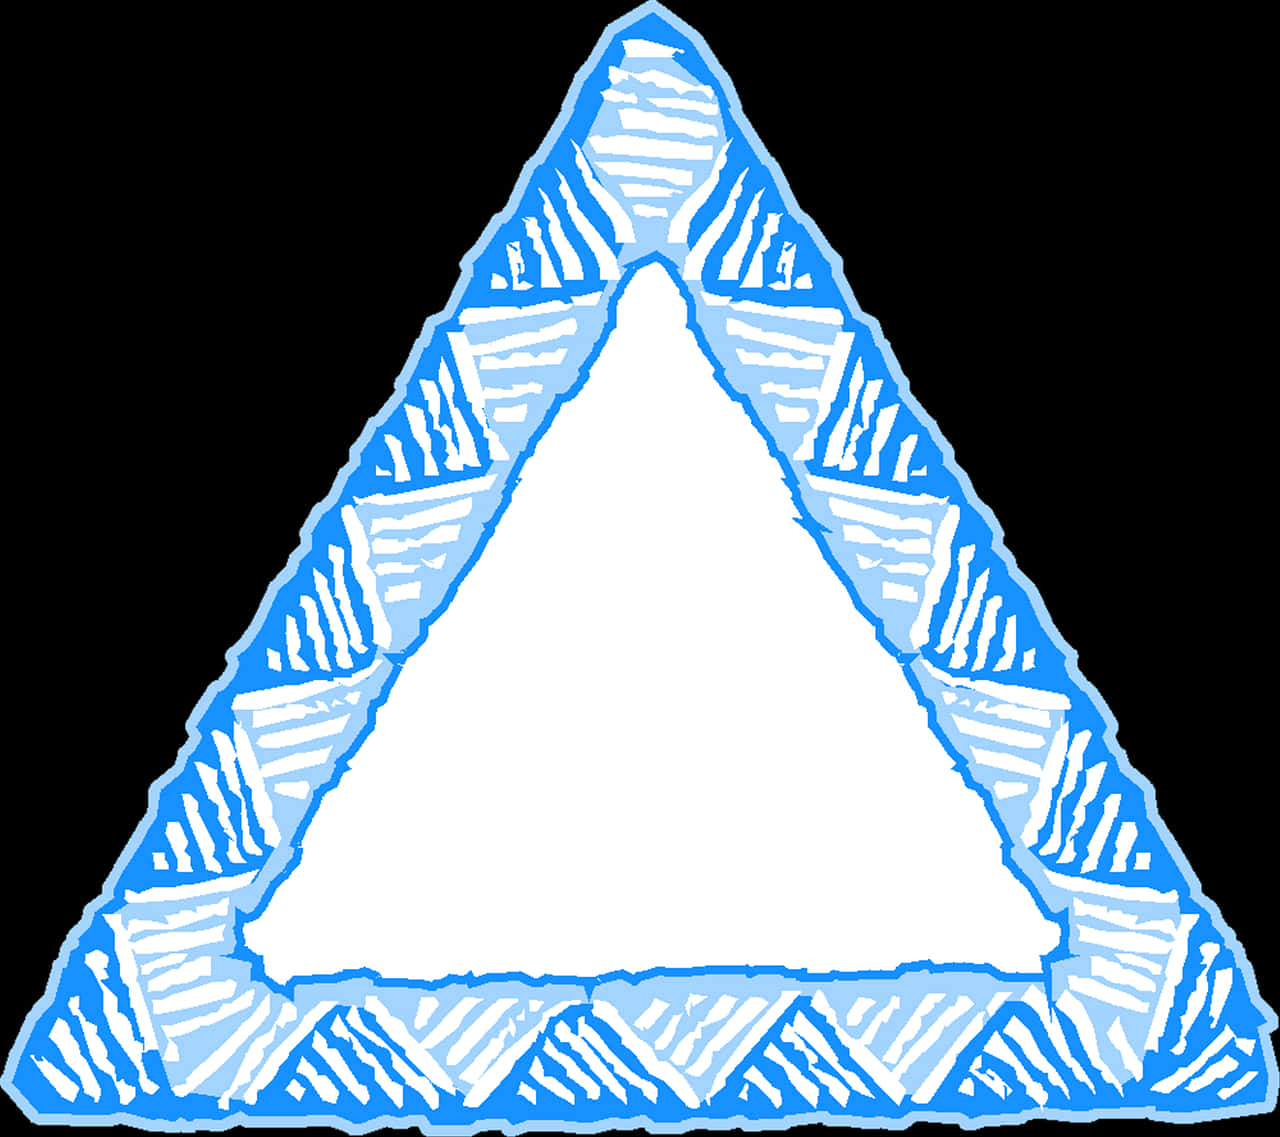 A Blue Triangle With White Border